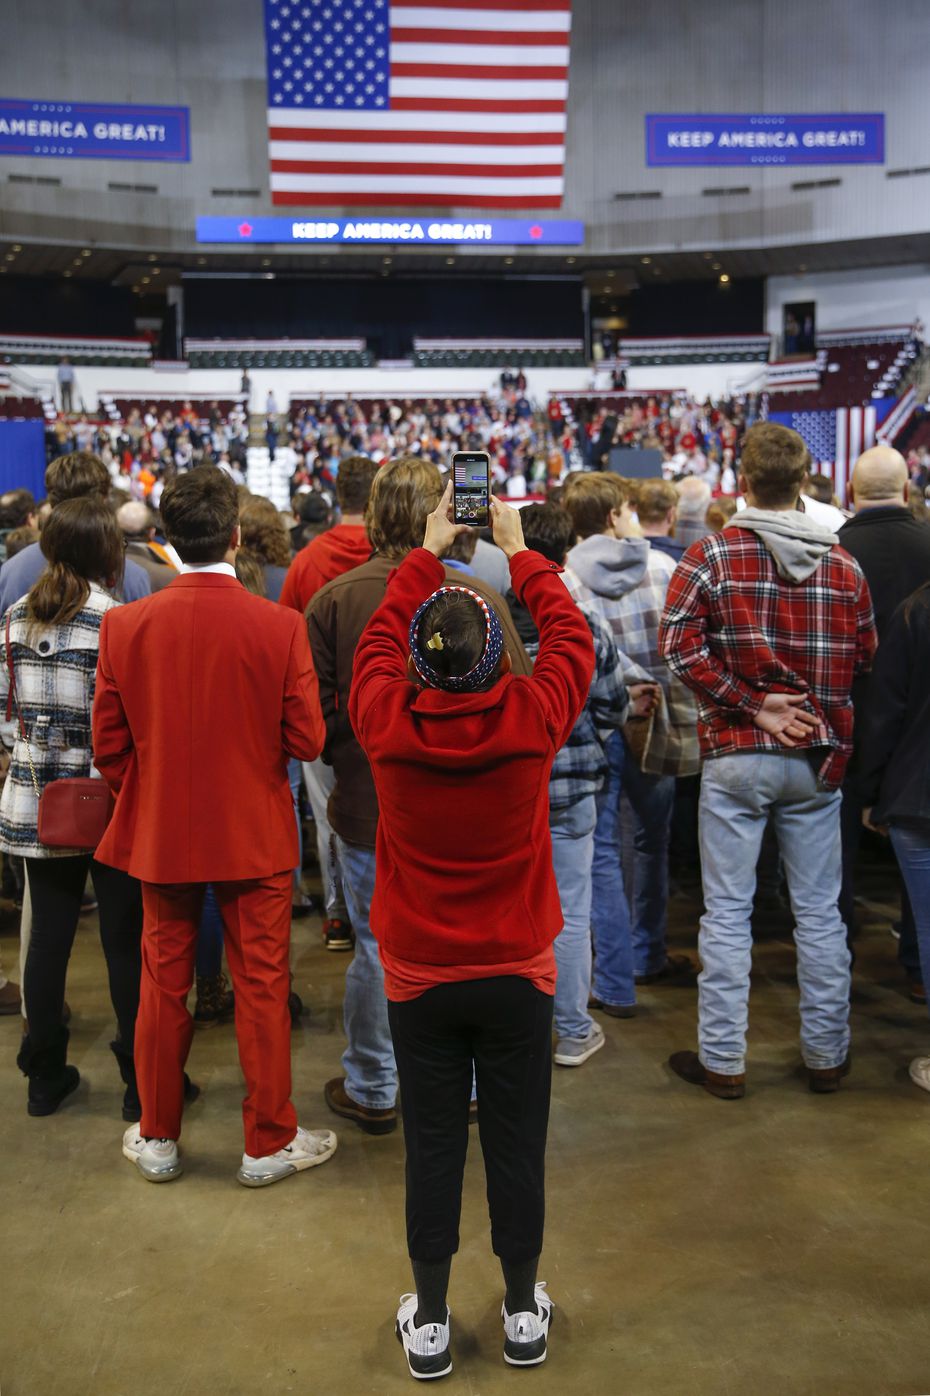 Martha Doss recorded a video of opening speakers at a rally to reelect President Donald Trump in Bossier City, La., on Nov. 14, 2019. Doss, a rising social media star in conservative circles, was sent by the National Republican Hispanic Assembly to create social media content.